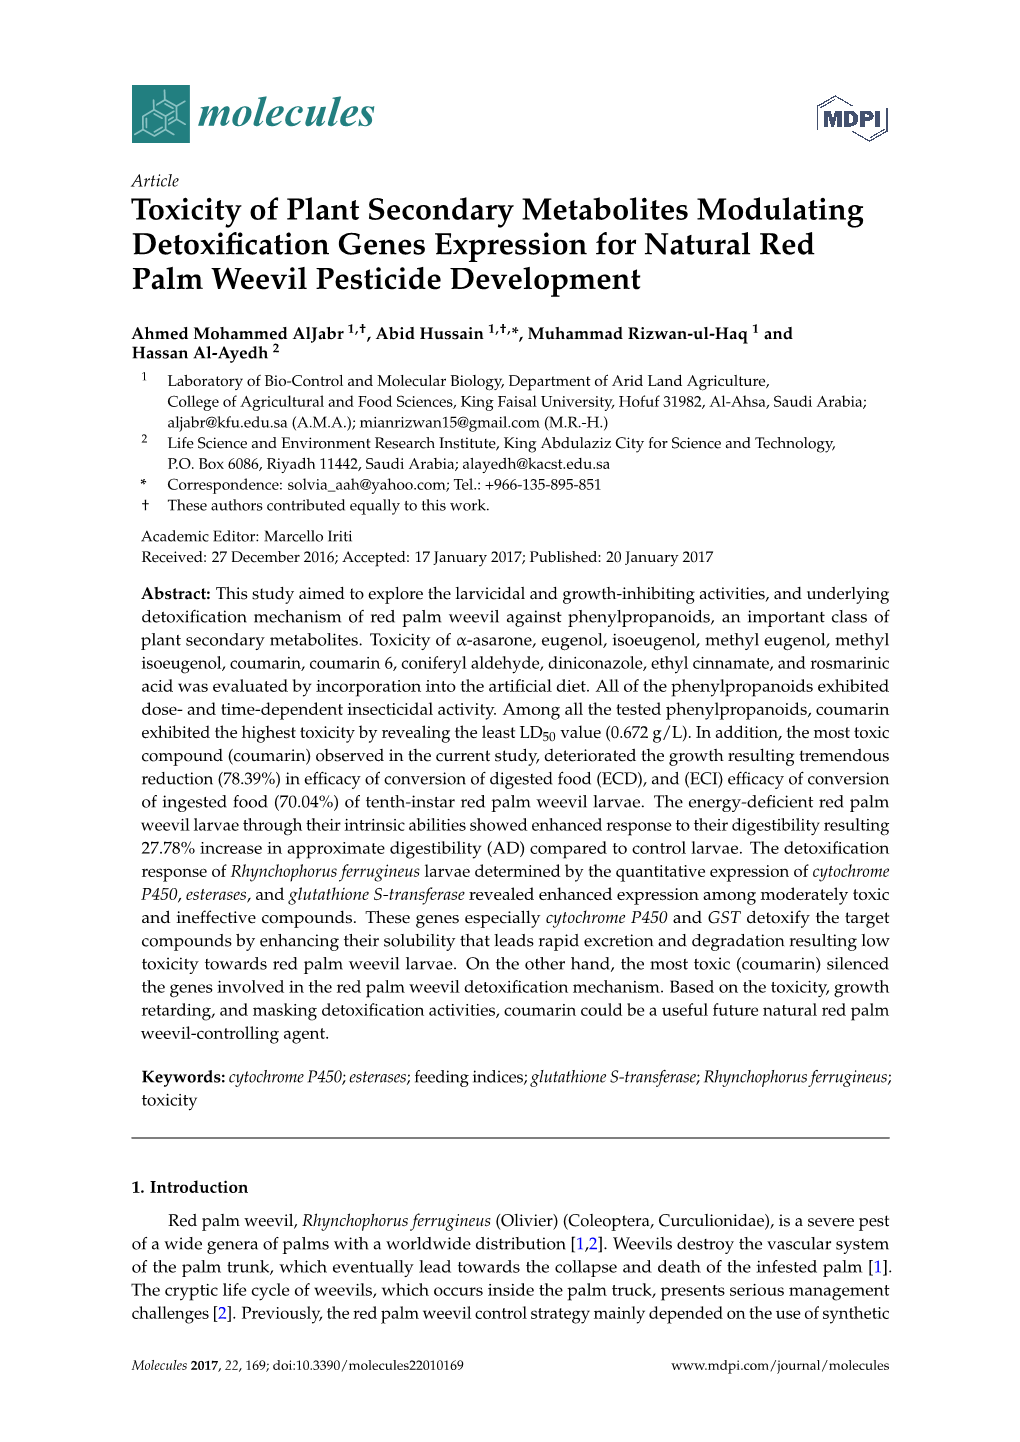 Toxicity of Plant Secondary Metabolites Modulating Detoxiﬁcation Genes Expression for Natural Red Palm Weevil Pesticide Development